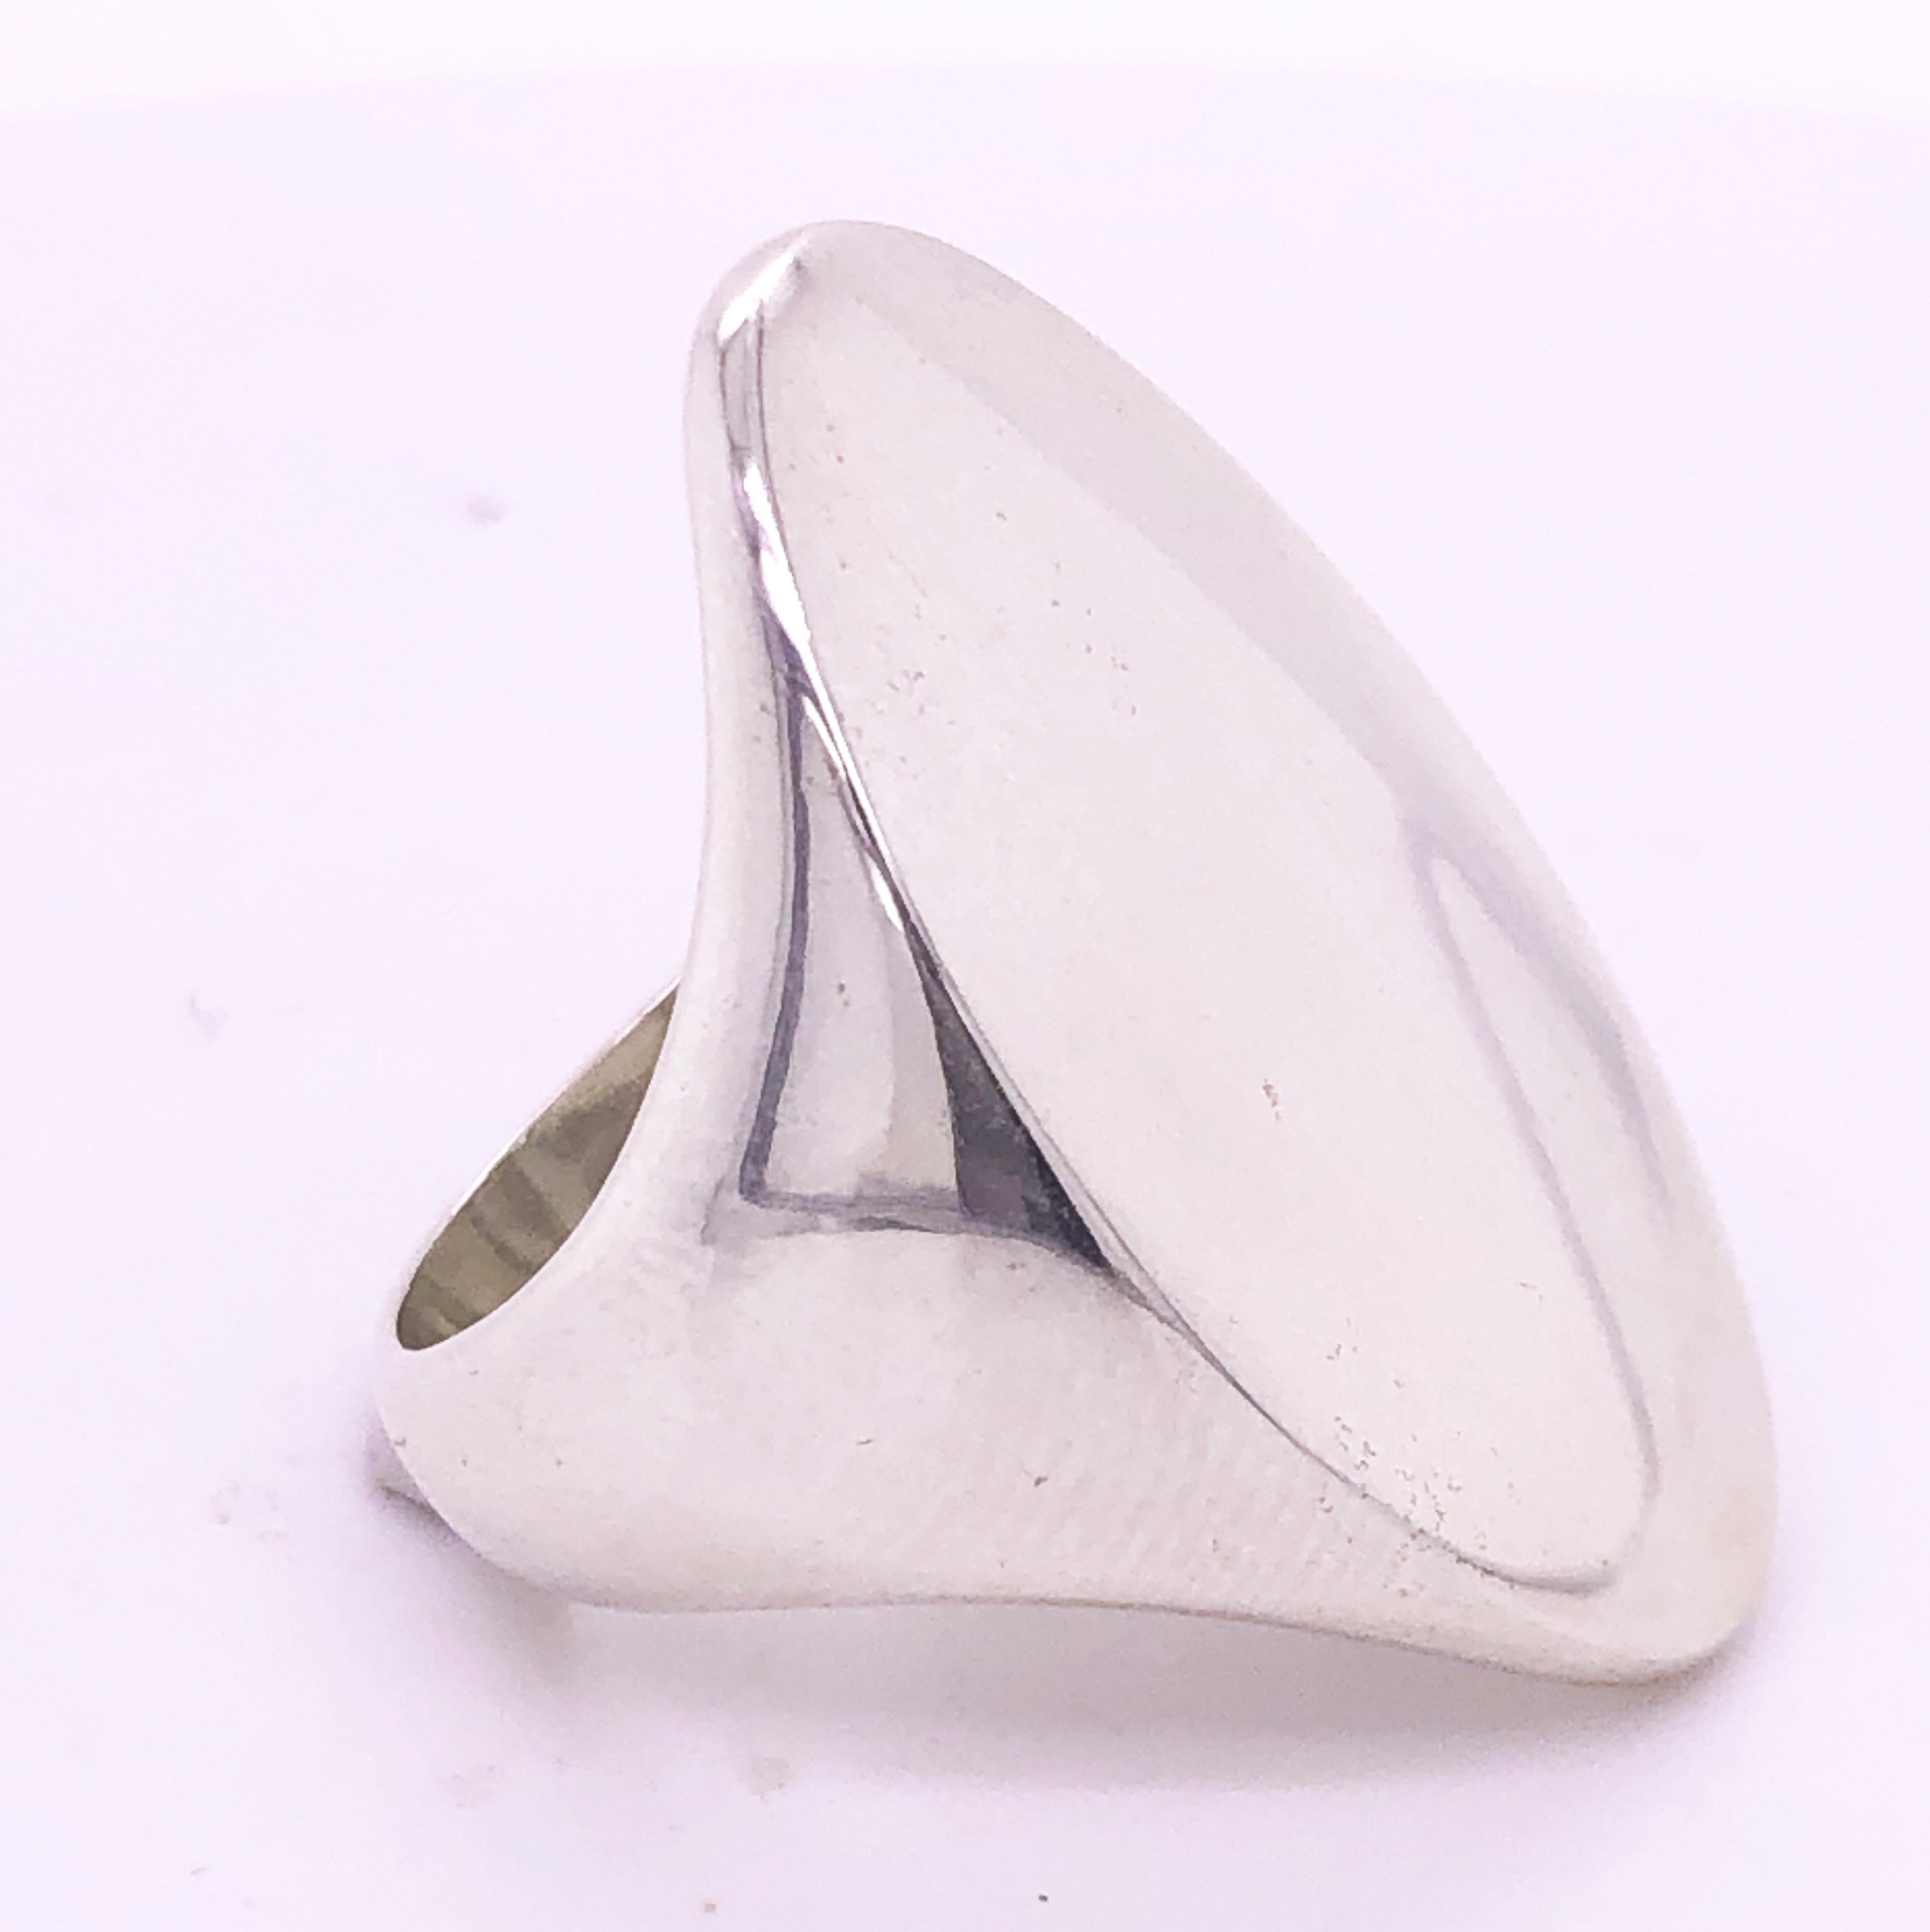 One-of-a-kind Pomellato Solid Sterling Silver, Mirror Finish, Elliptical Shaped Unusual Signet Ring. Few Pieces of this unique, very chic piece were handcrafted in Milan Pomellato Atelier.
In its original Pomellato pouch or lacquer case.
Us Size 5